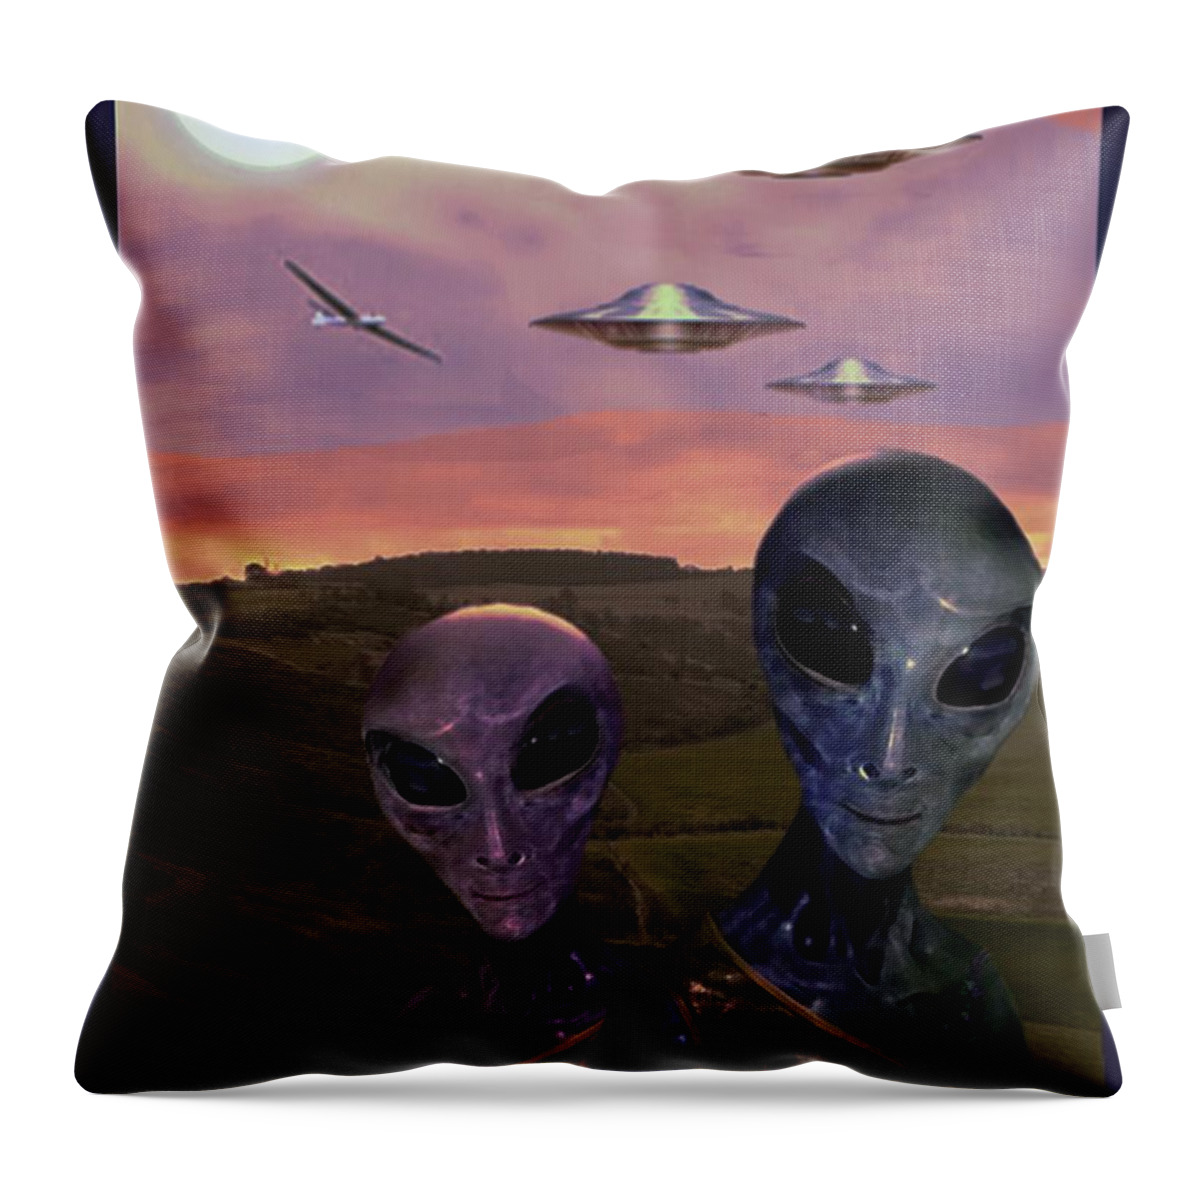 Aliens Throw Pillow featuring the mixed media Strange Encounter by Hartmut Jager